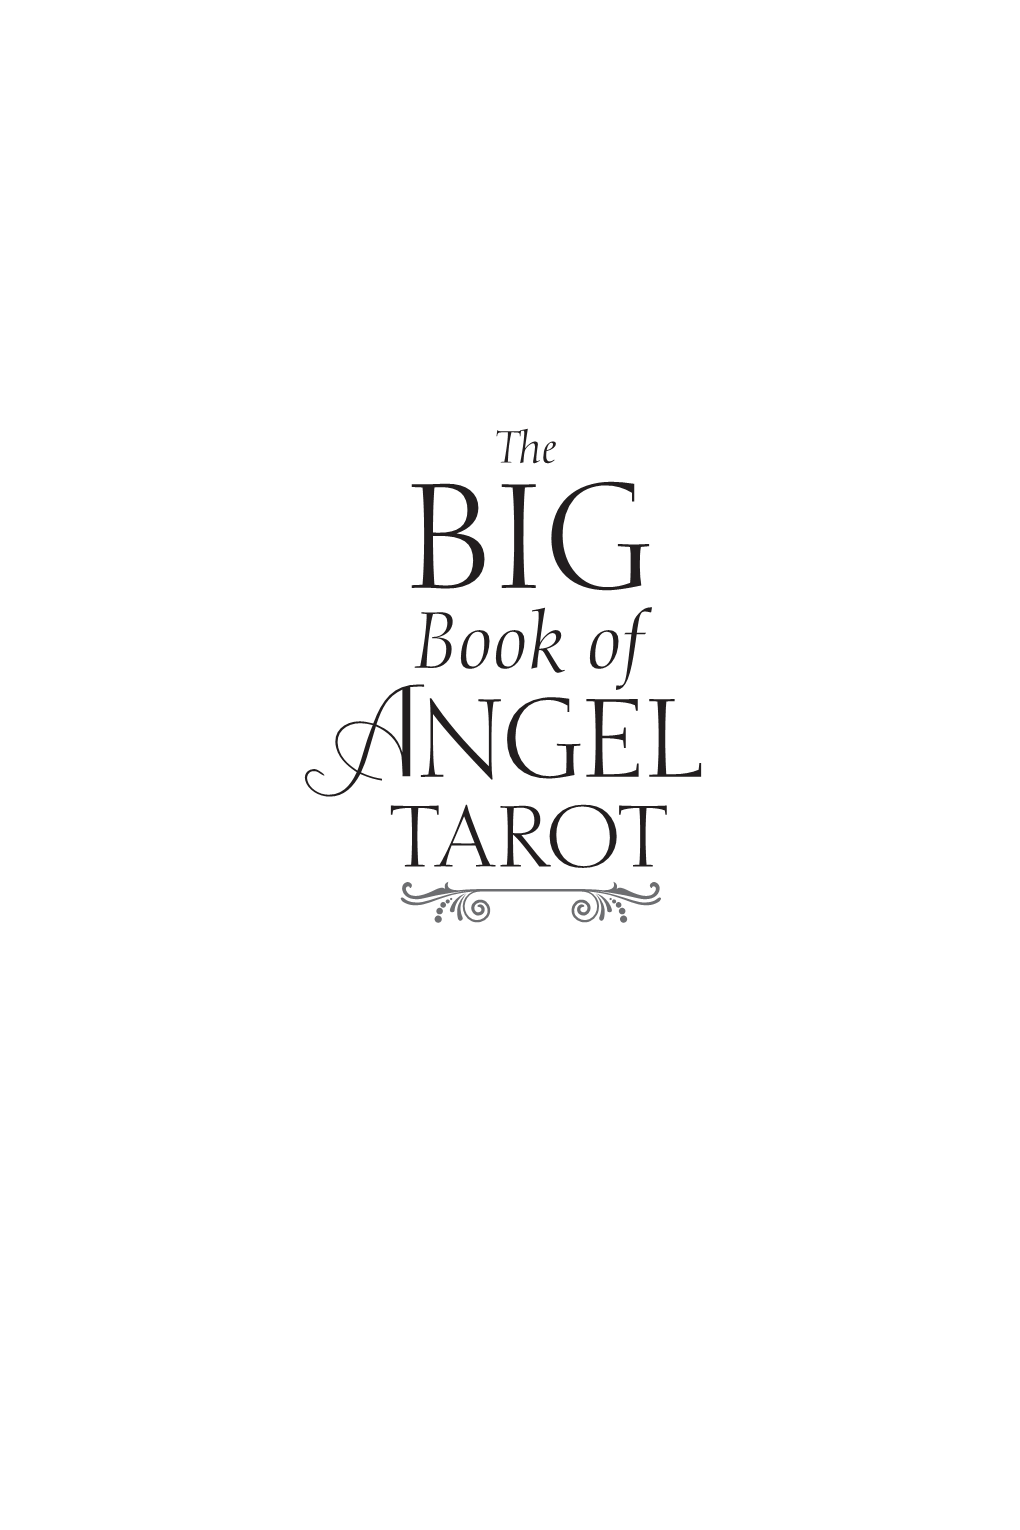 Book of  NGEL TAROT